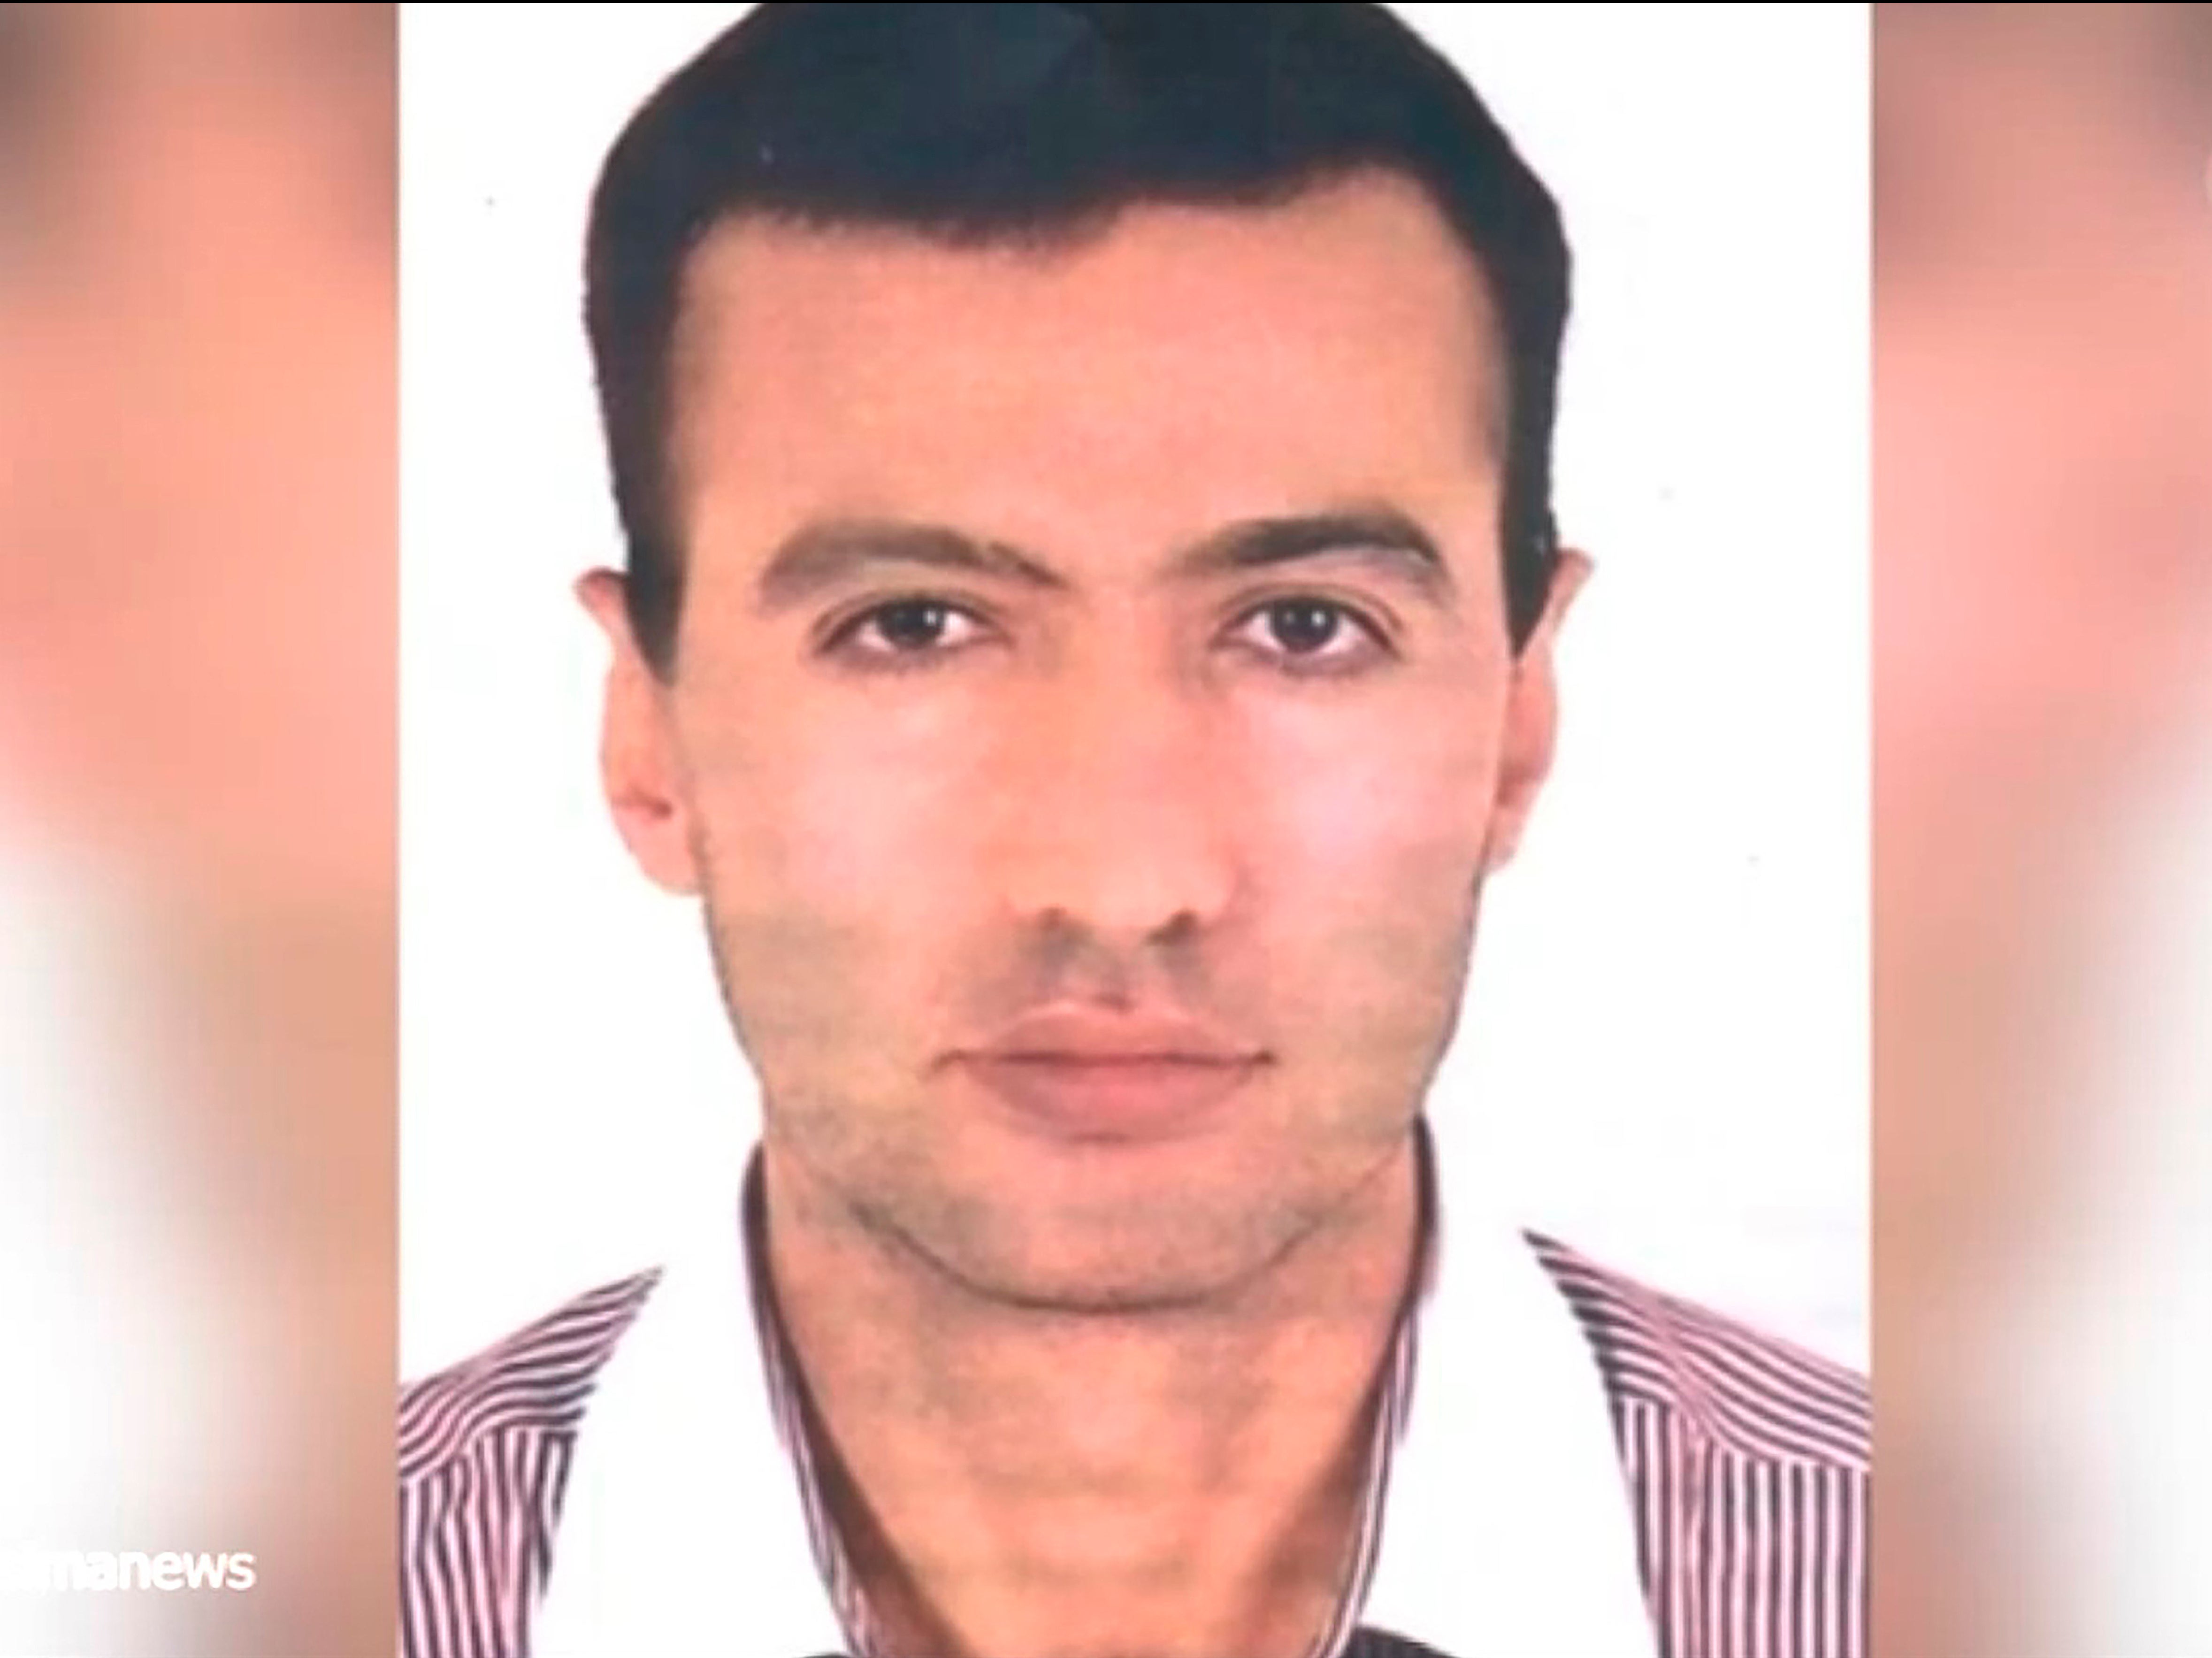 A screengrab of the report by Iran’s state-run broadcaster IRIB showing a man identified as Reza Karimi